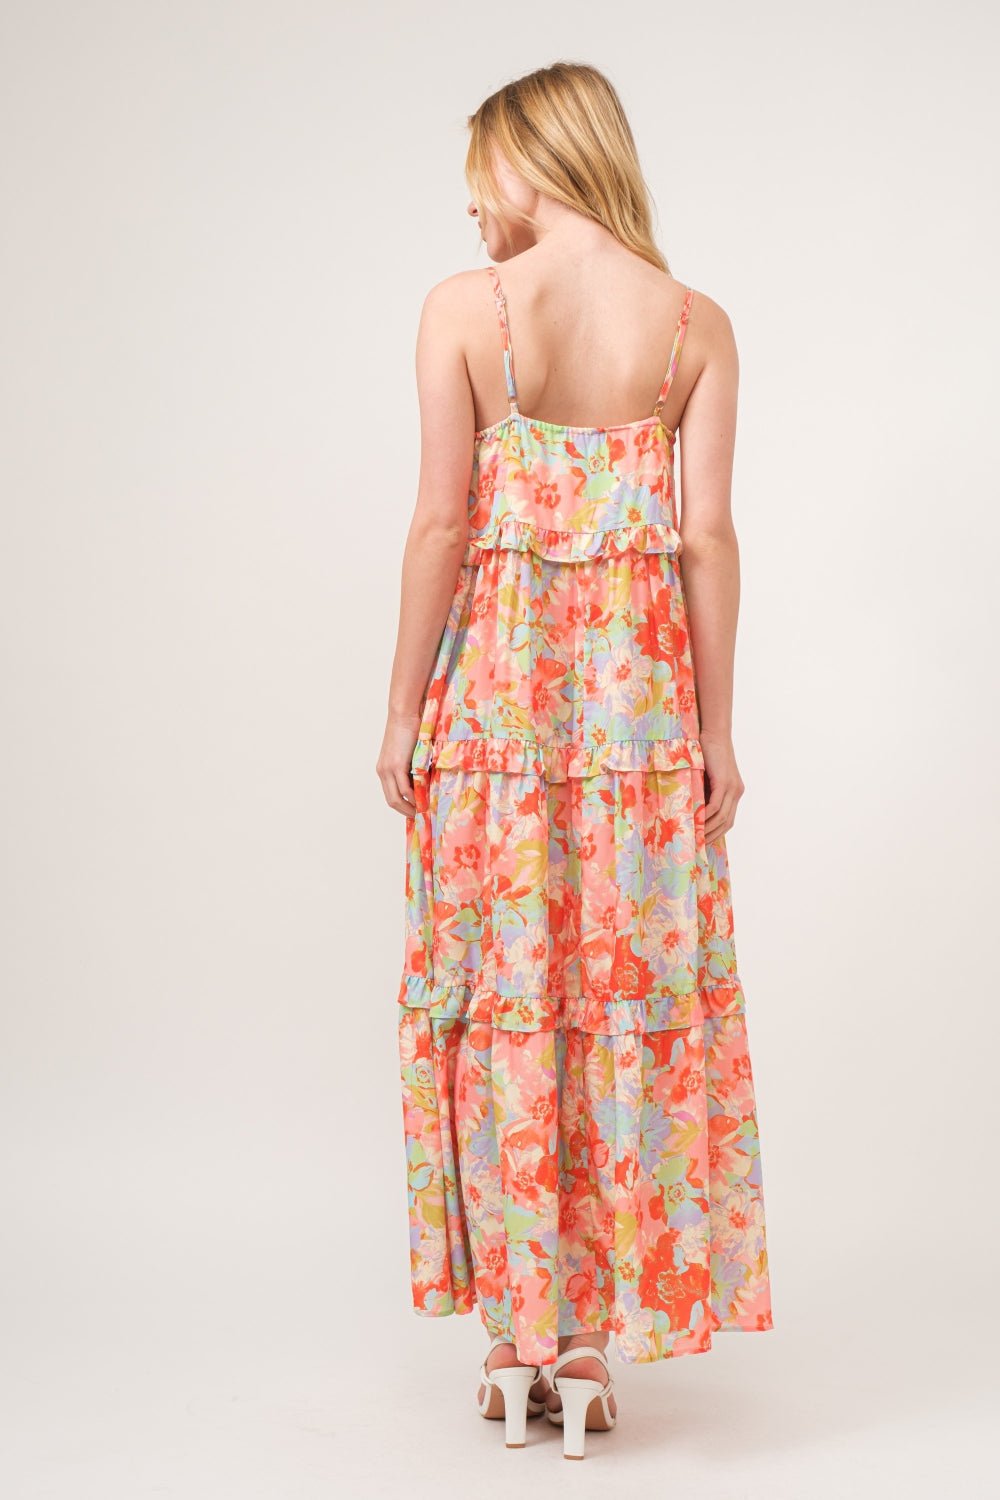 Floral Ruffled Tiered Maxi Cami DressMaxi DressAnd the Why